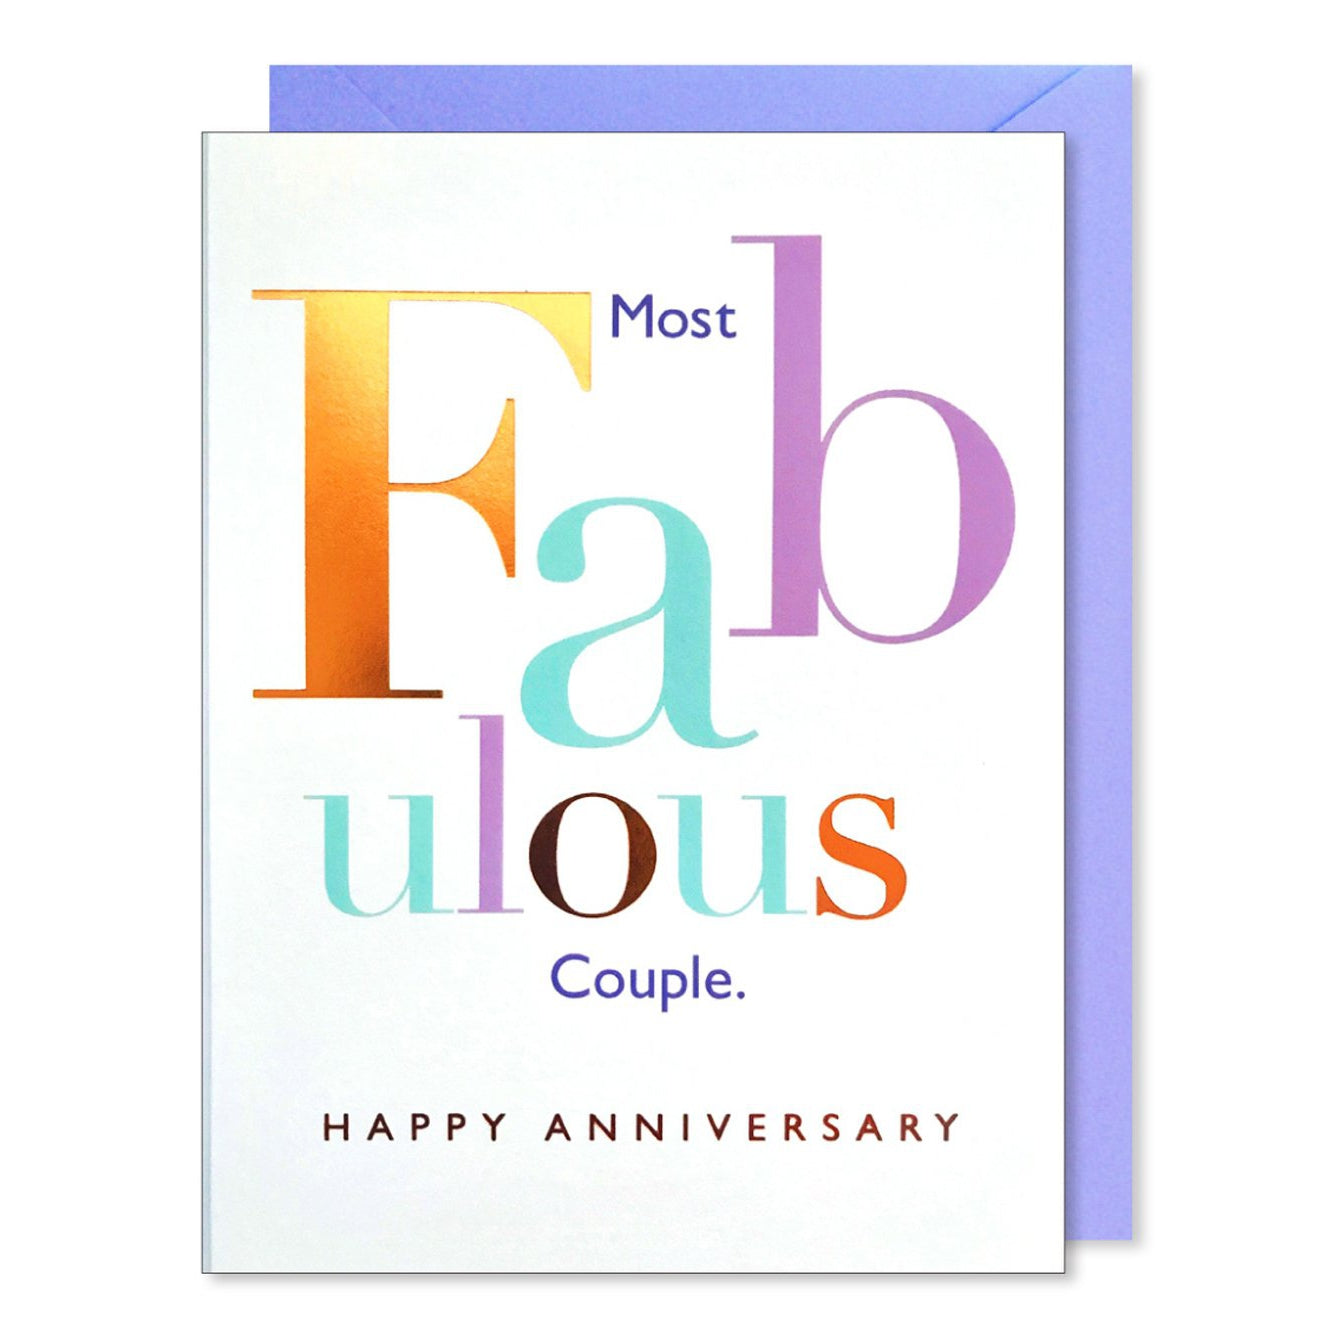 Most Fab Couple Anniversary Greeting Card